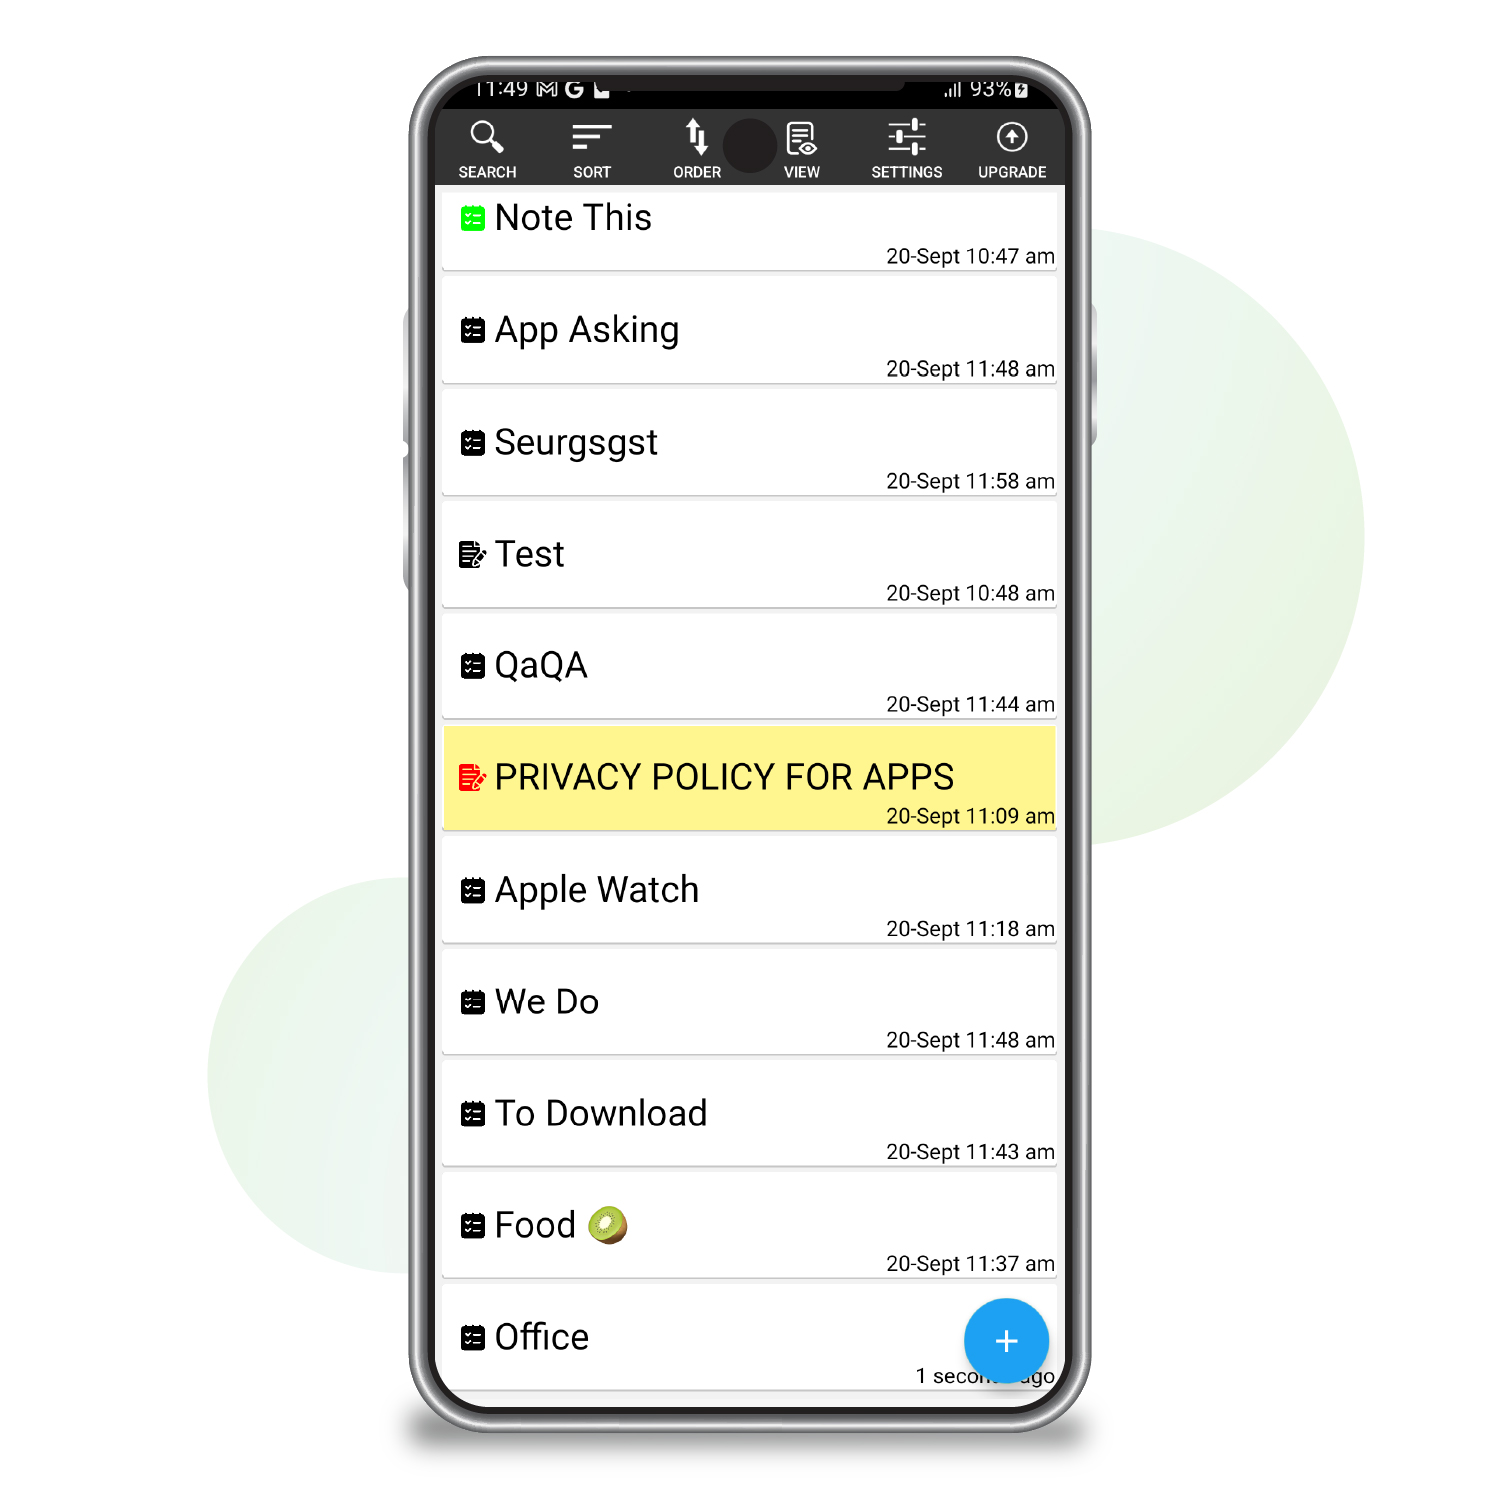 Ultimate Notepad - Privacy Policy For Apps